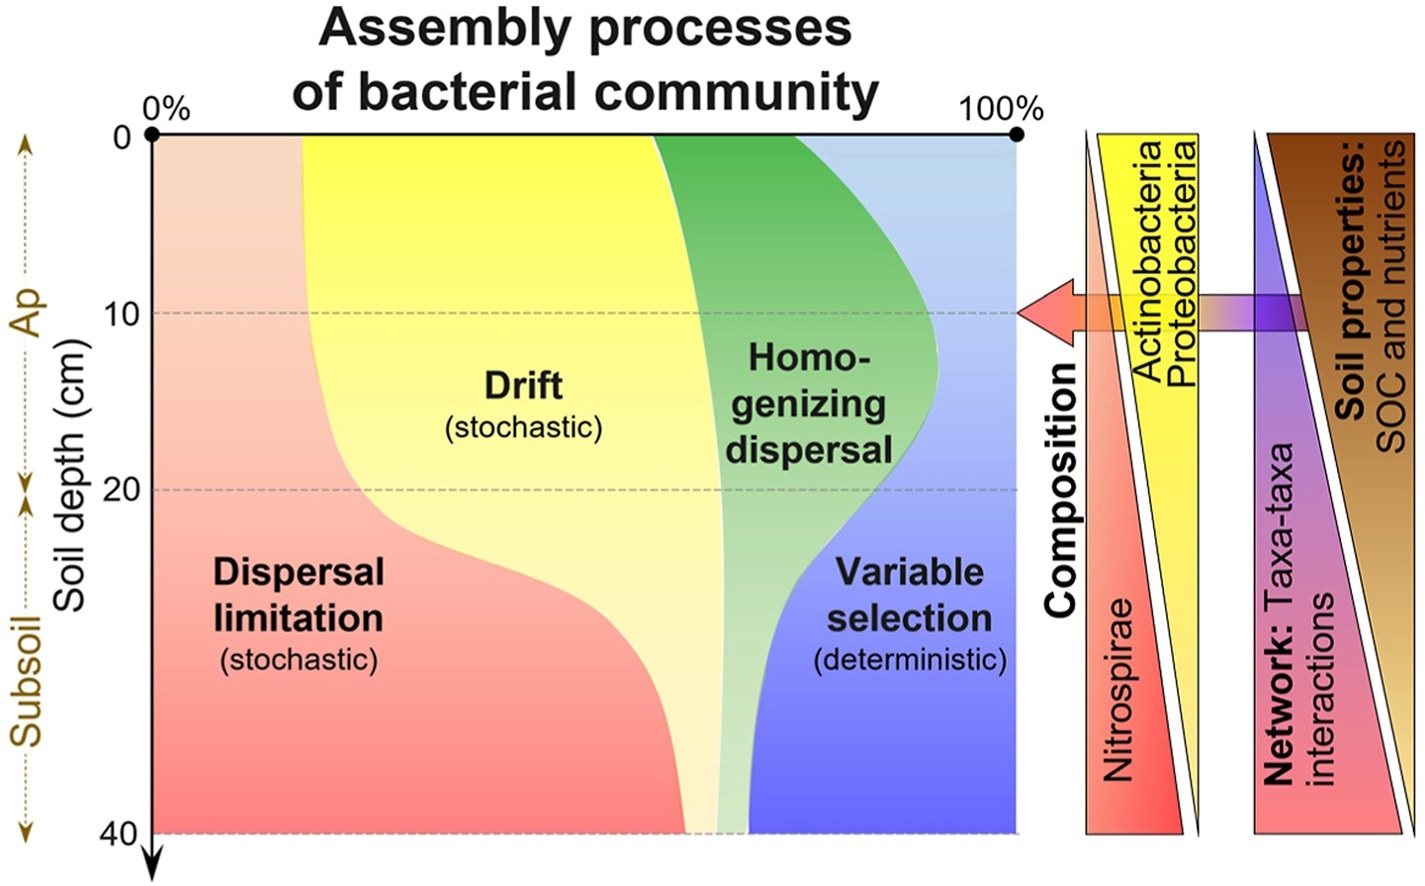 Study evaluates the basic principles of bacterial community assembly